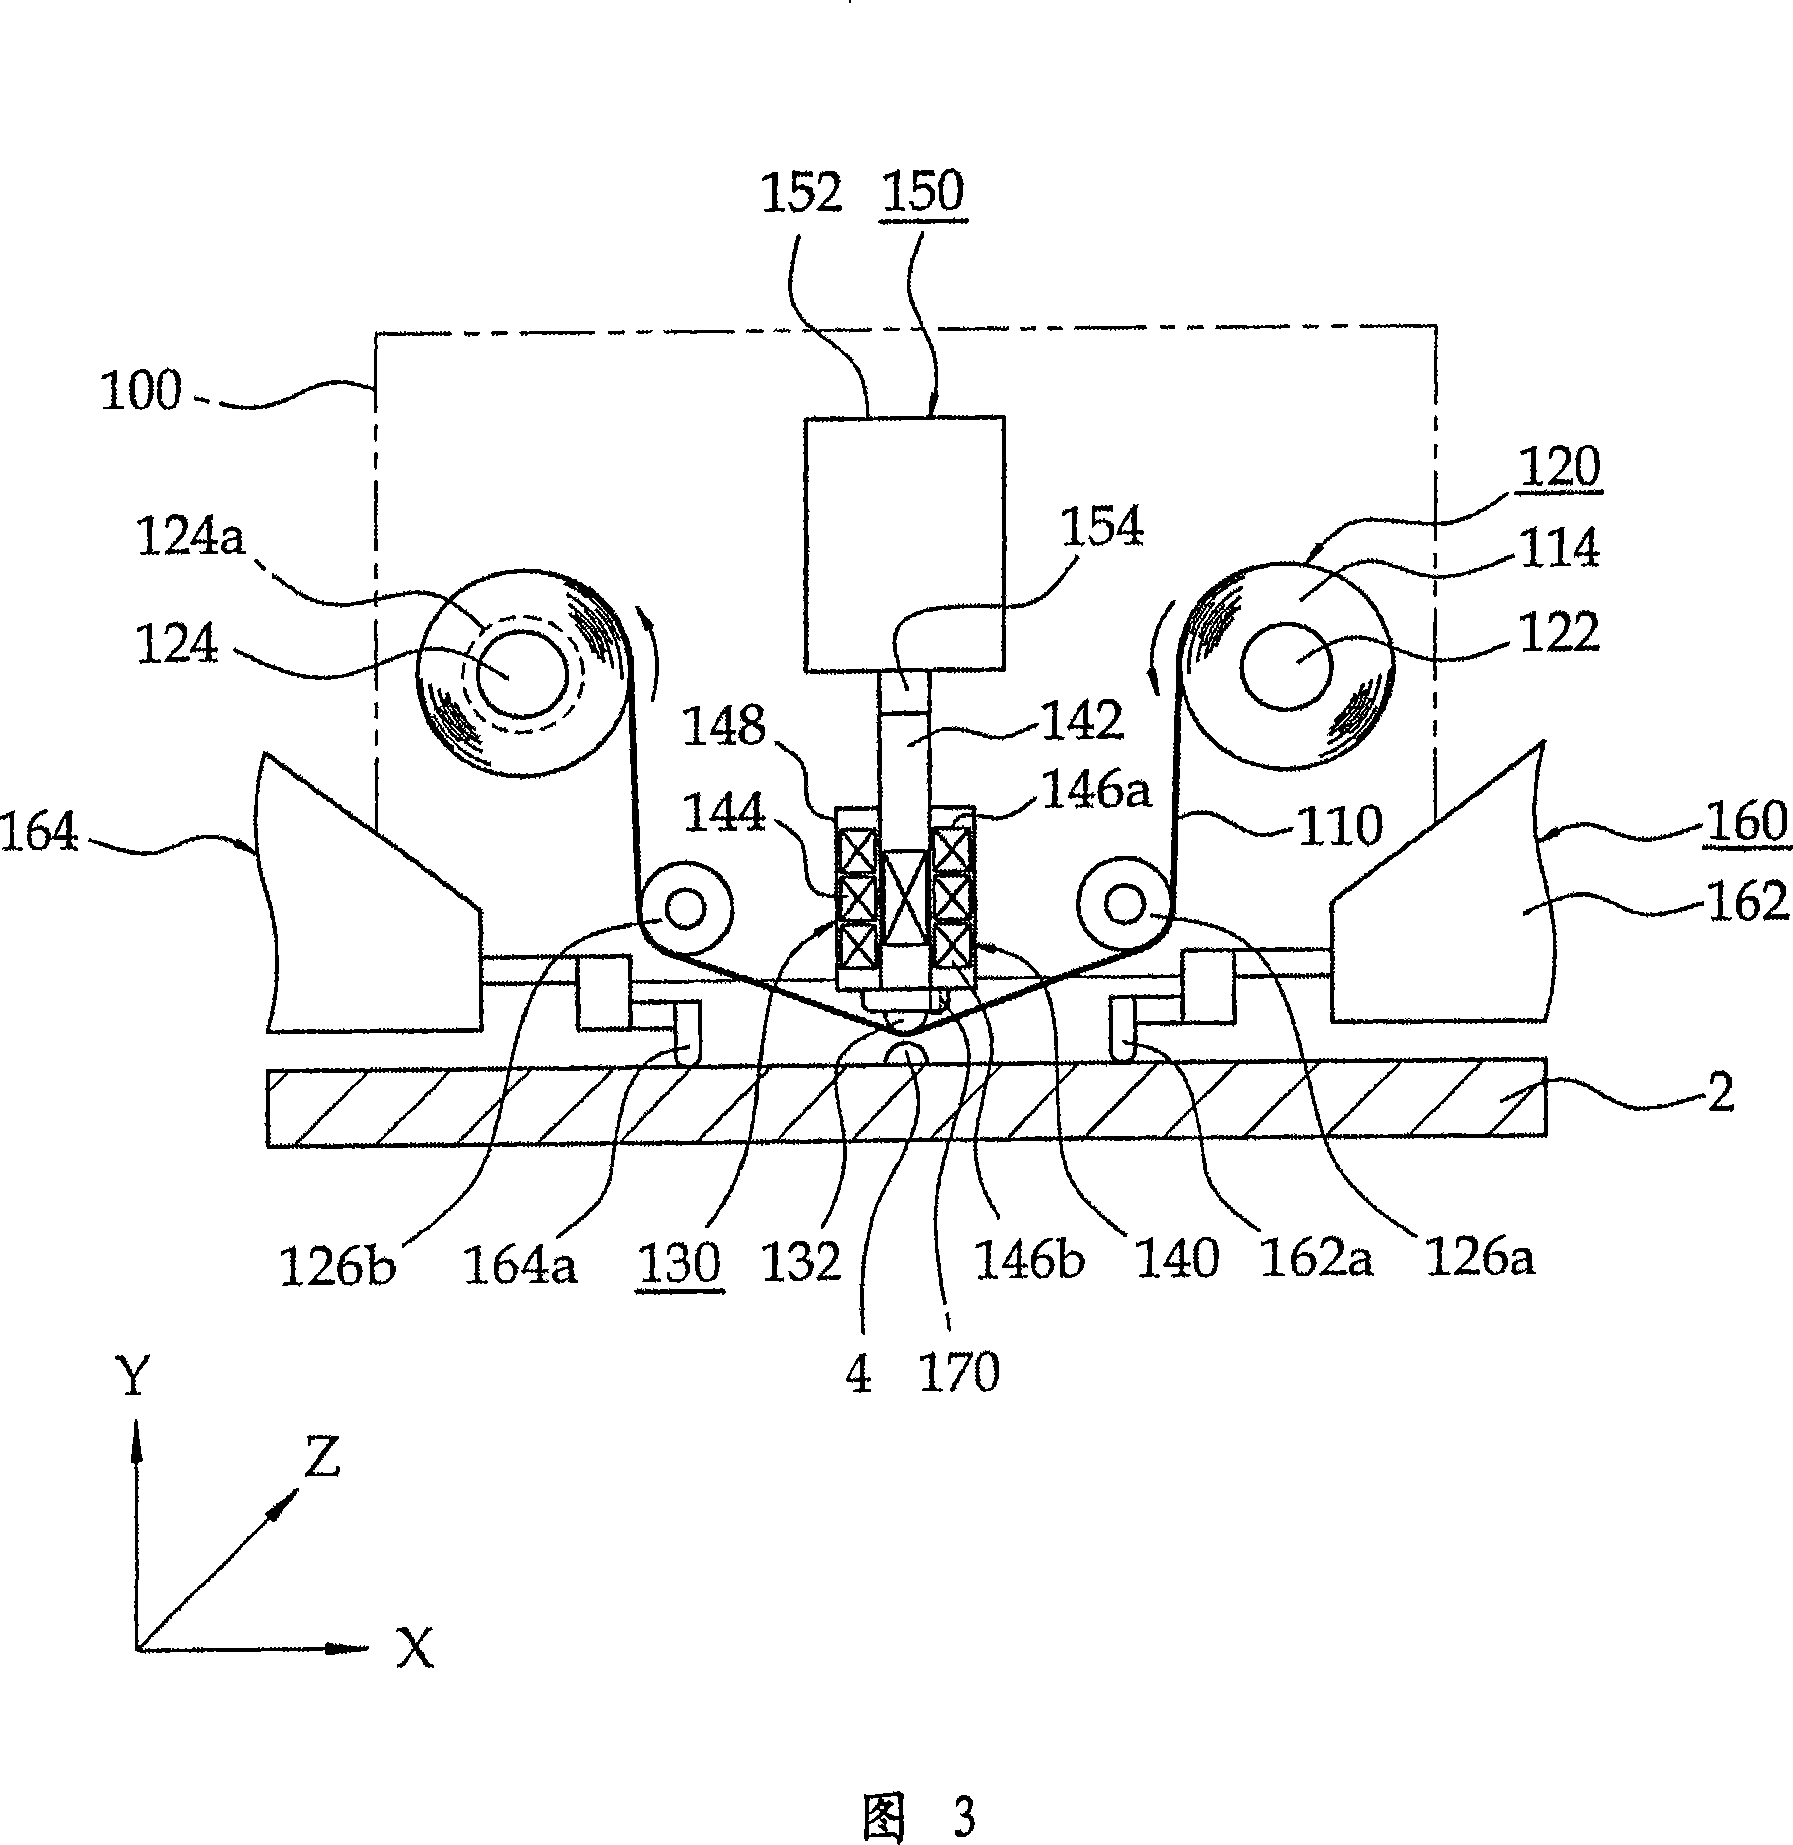 Substrate repairing device and method